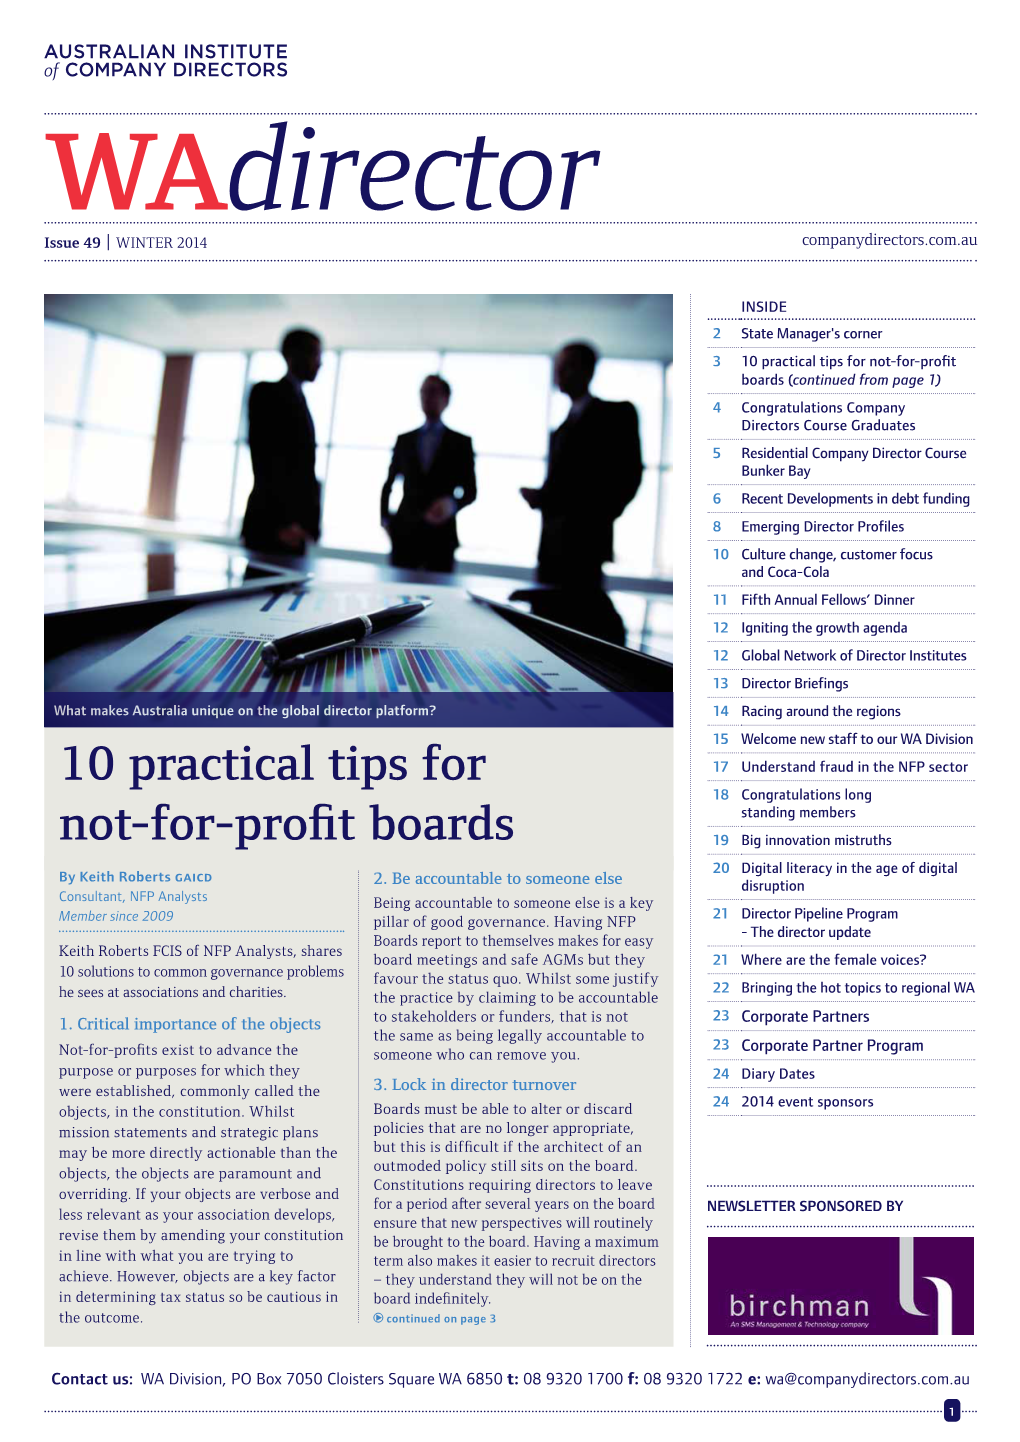 10 Practical Tips for Not-For-Profit Boards